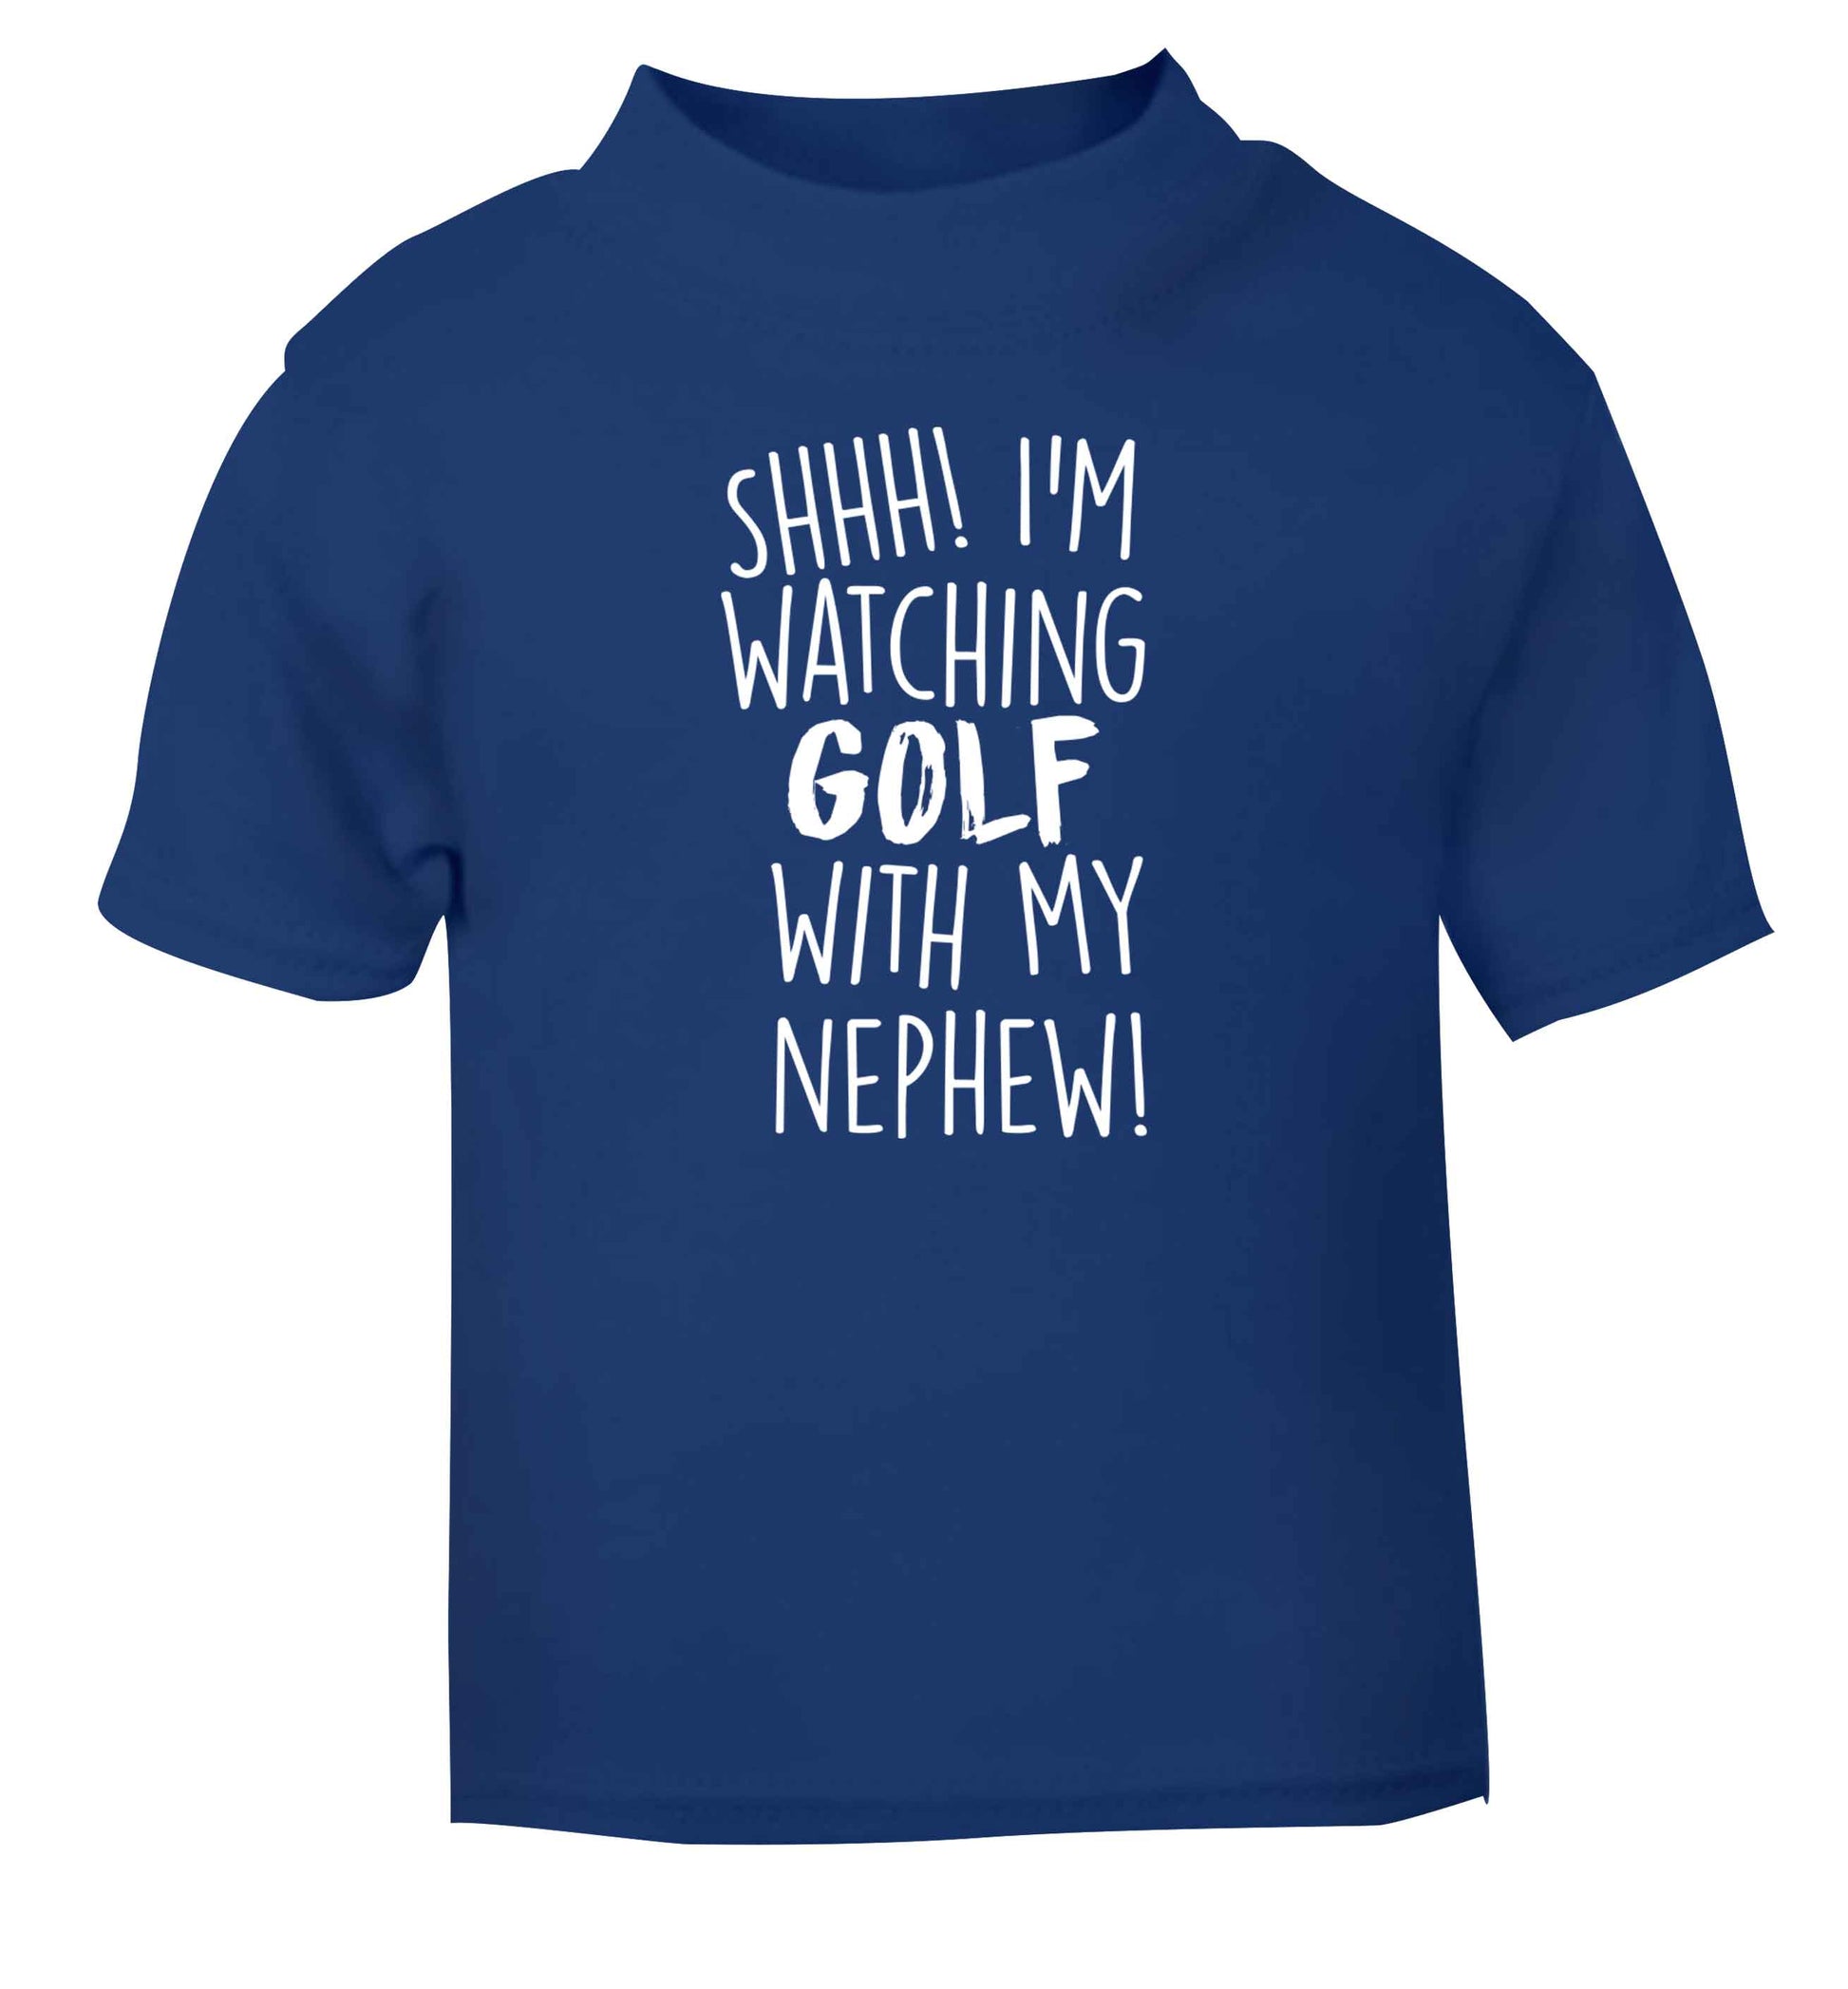 Shh I'm watching golf with my nephew blue Baby Toddler Tshirt 2 Years